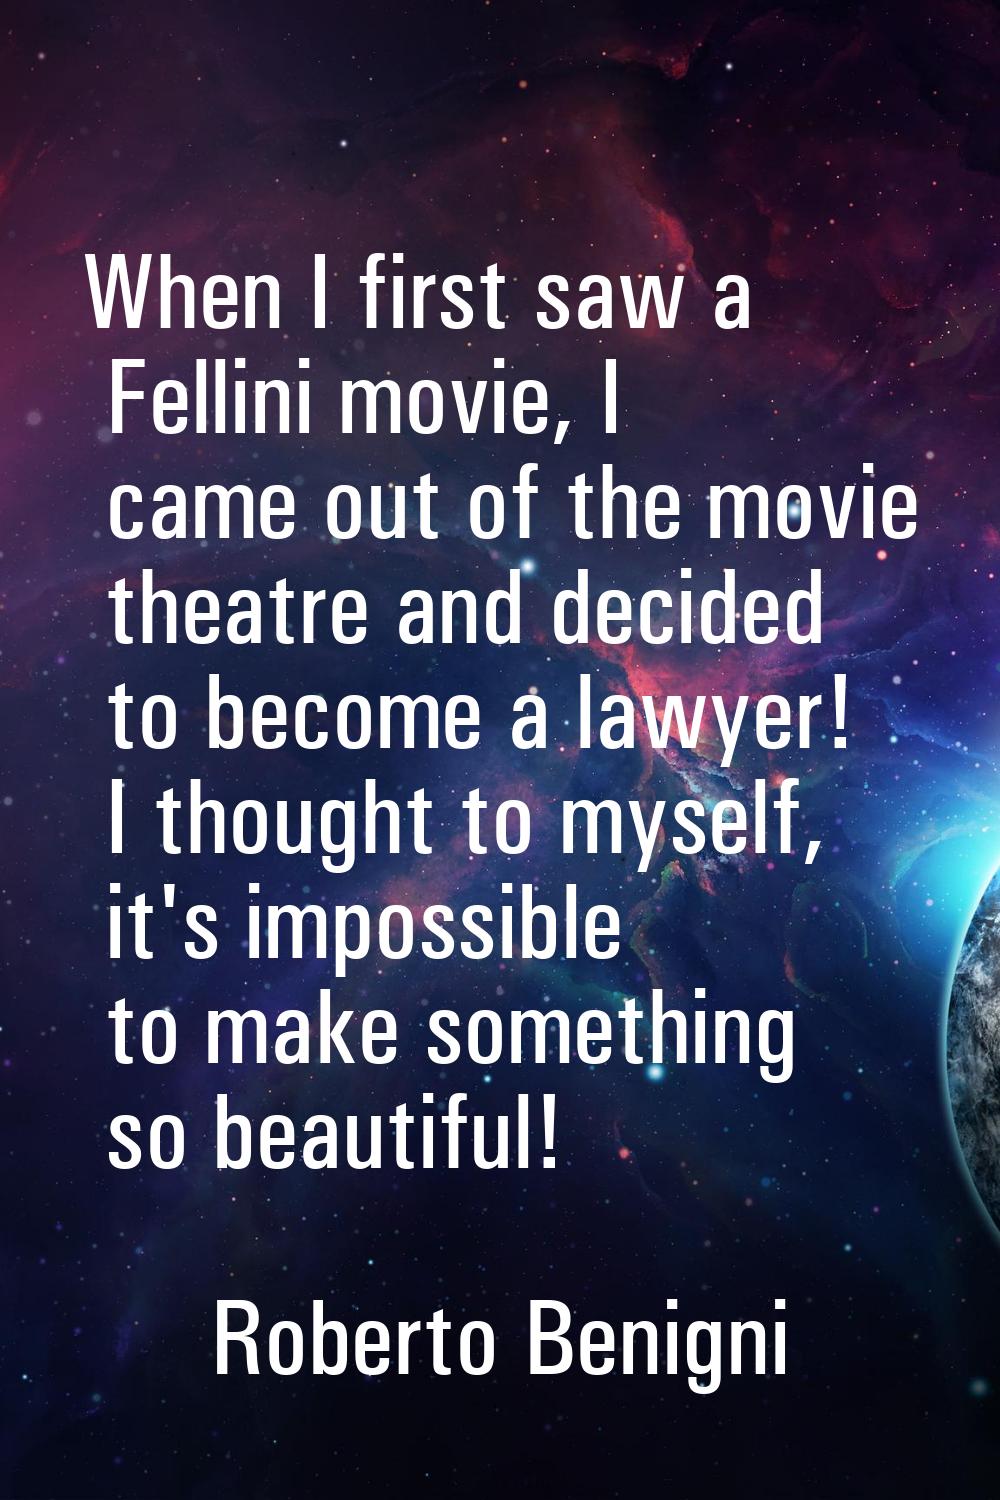 When I first saw a Fellini movie, I came out of the movie theatre and decided to become a lawyer! I